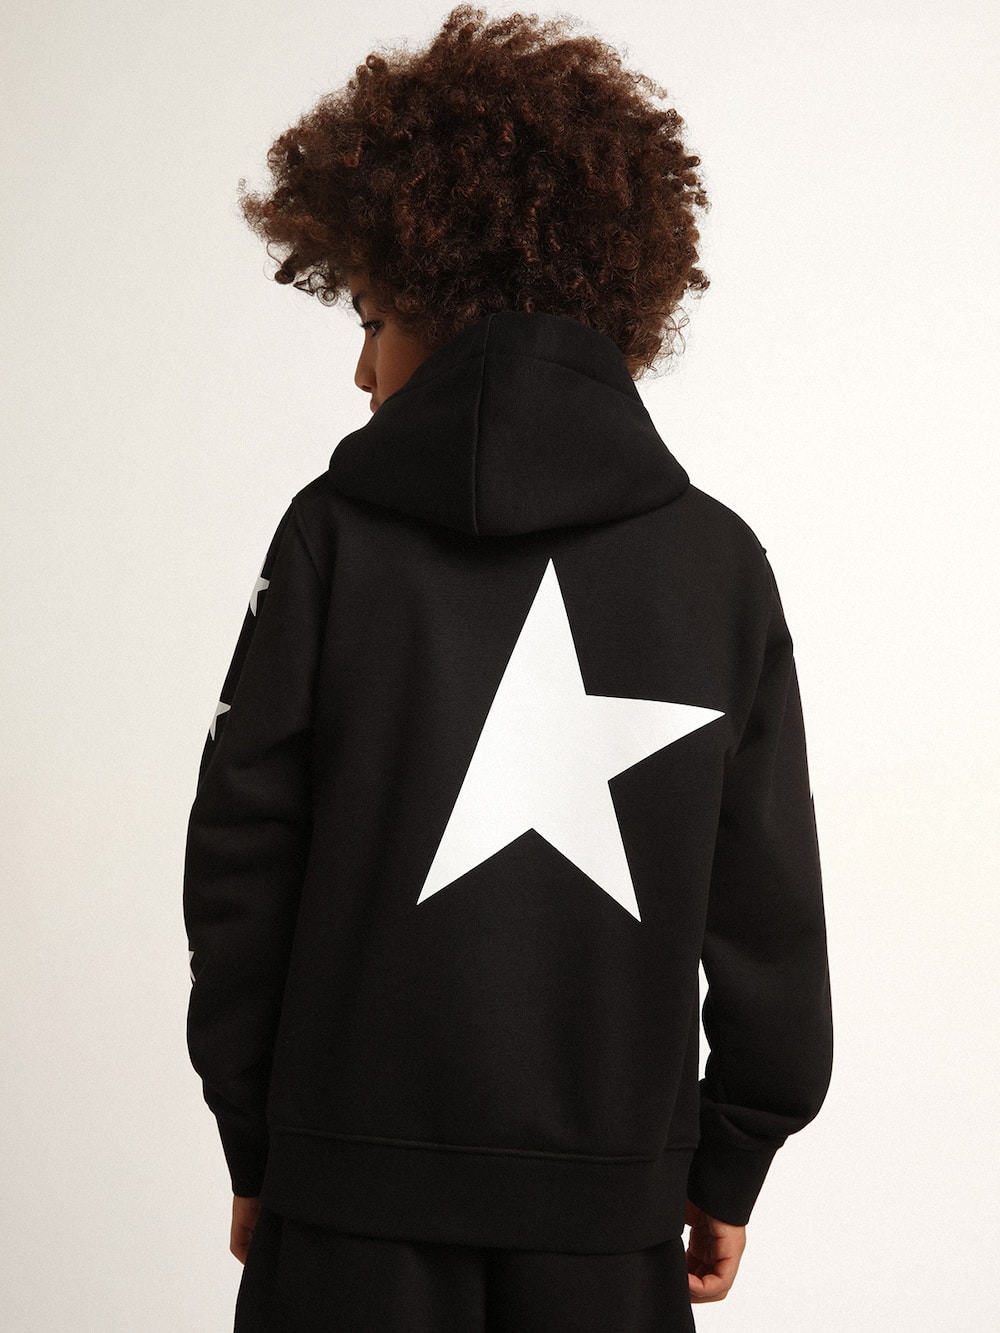 Golden Goose - Boys’ hooded sweatshirt in black with contrasting white stars in 